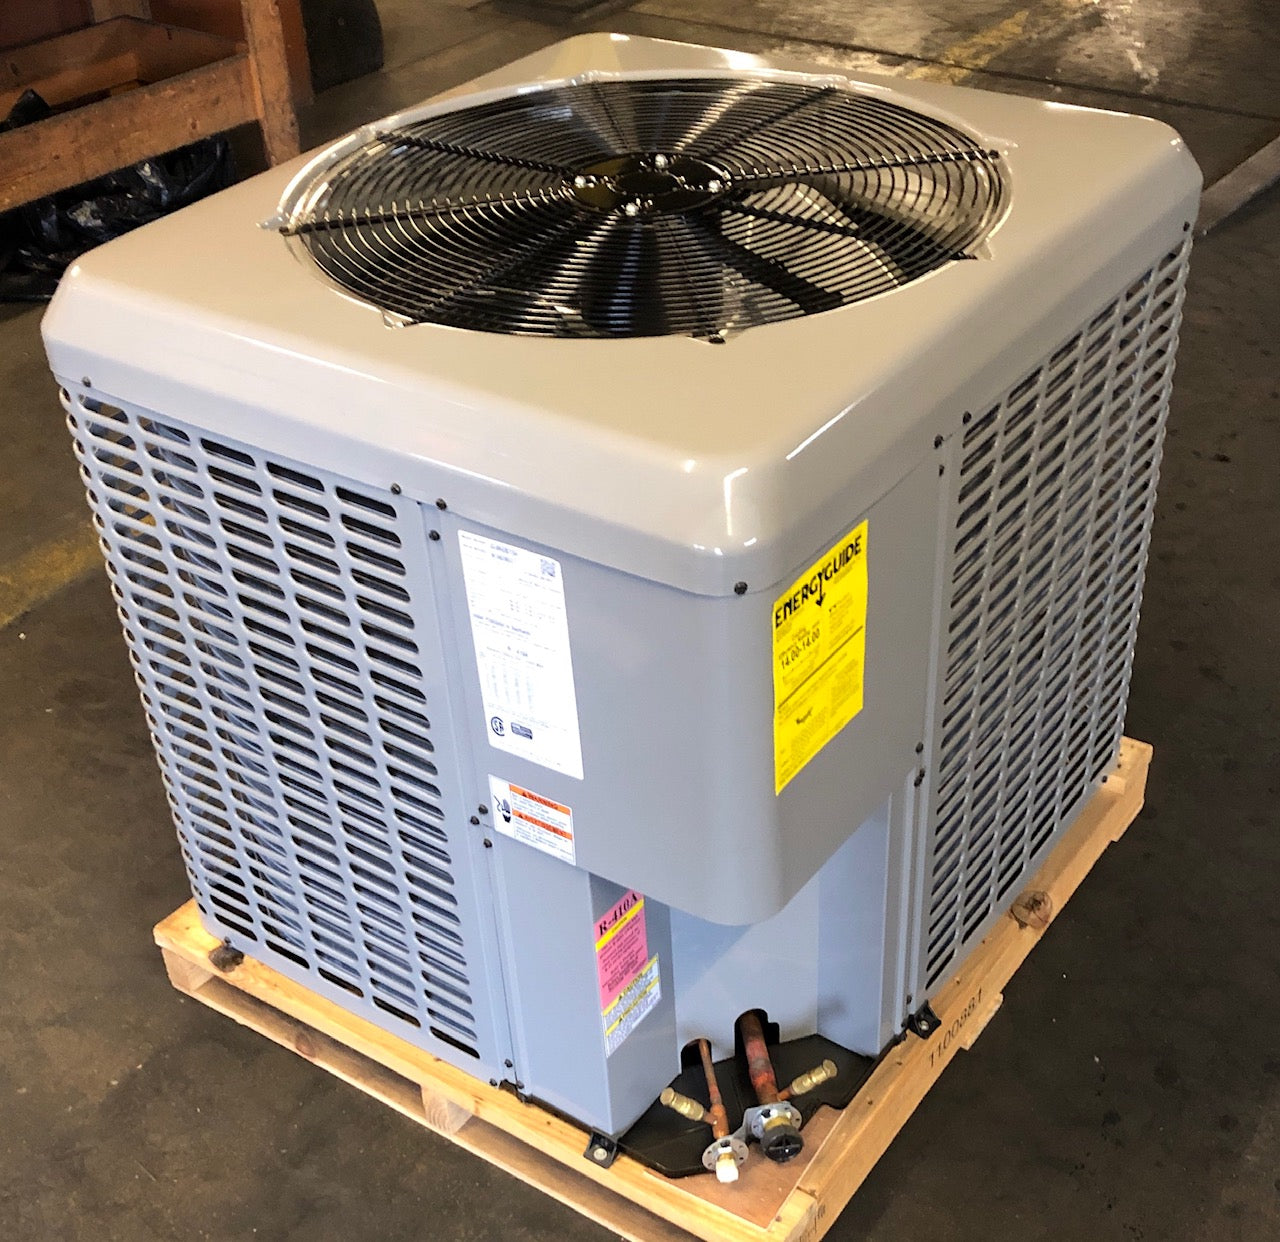 3-1/2 TON MANUFACTURED HOUSING AIR CONDITIONING CONDENSING UNIT, 14-SEER, 208-230/60/1 R-410A